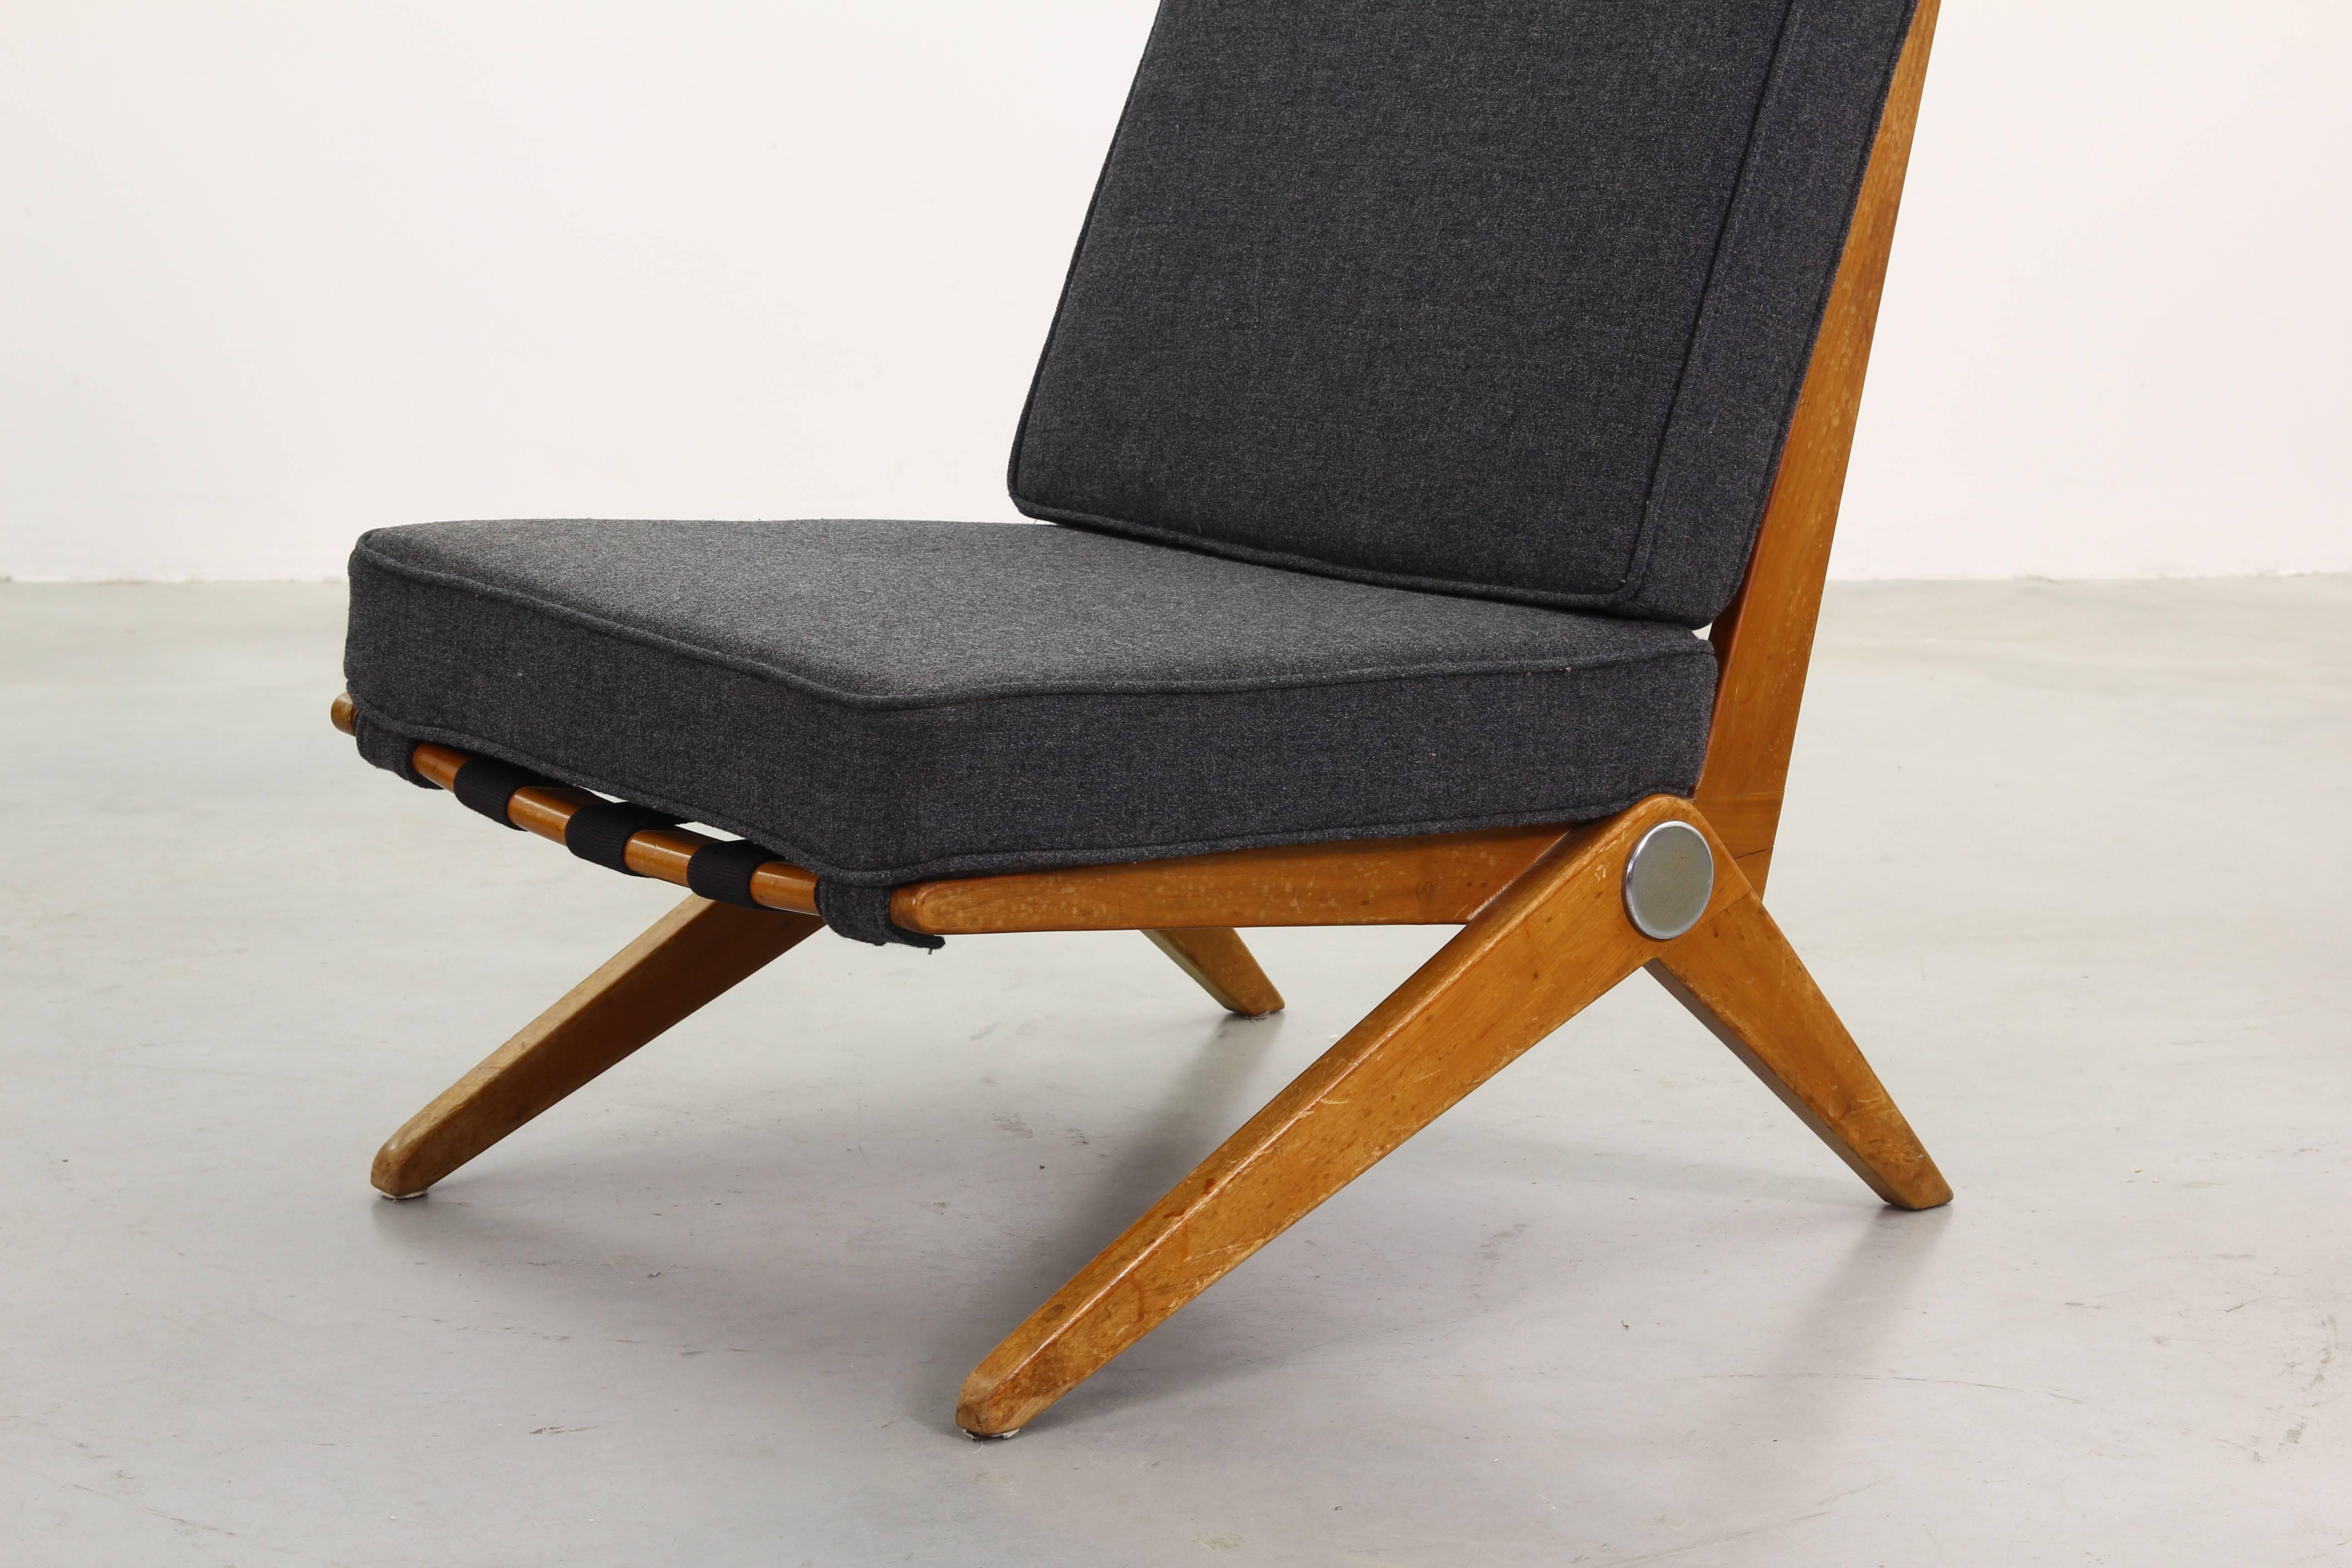 Nutwood Pair of Scissor Lounge Chairs by Pierre Jeanneret for Knoll International, 1957